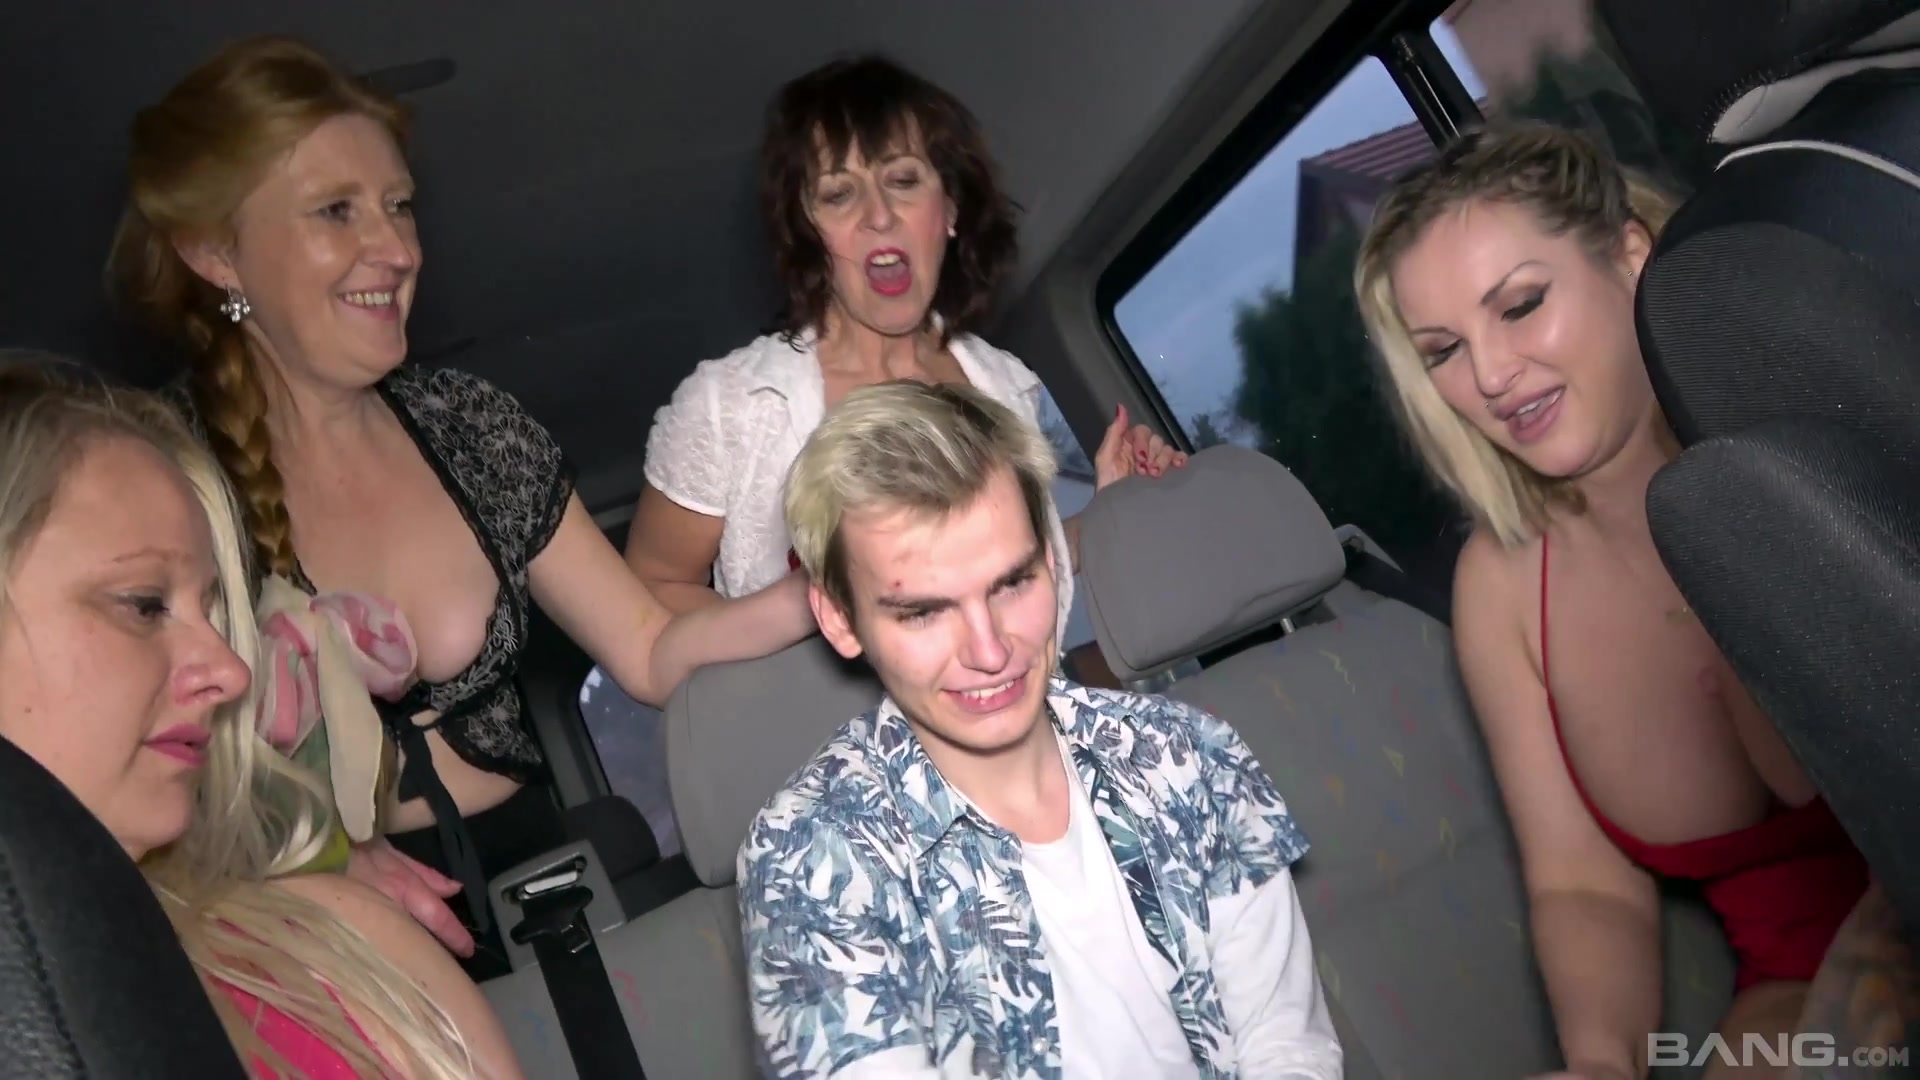 Nude bang bus orgy for a bunch of mature ladies on fire - Hell Porno